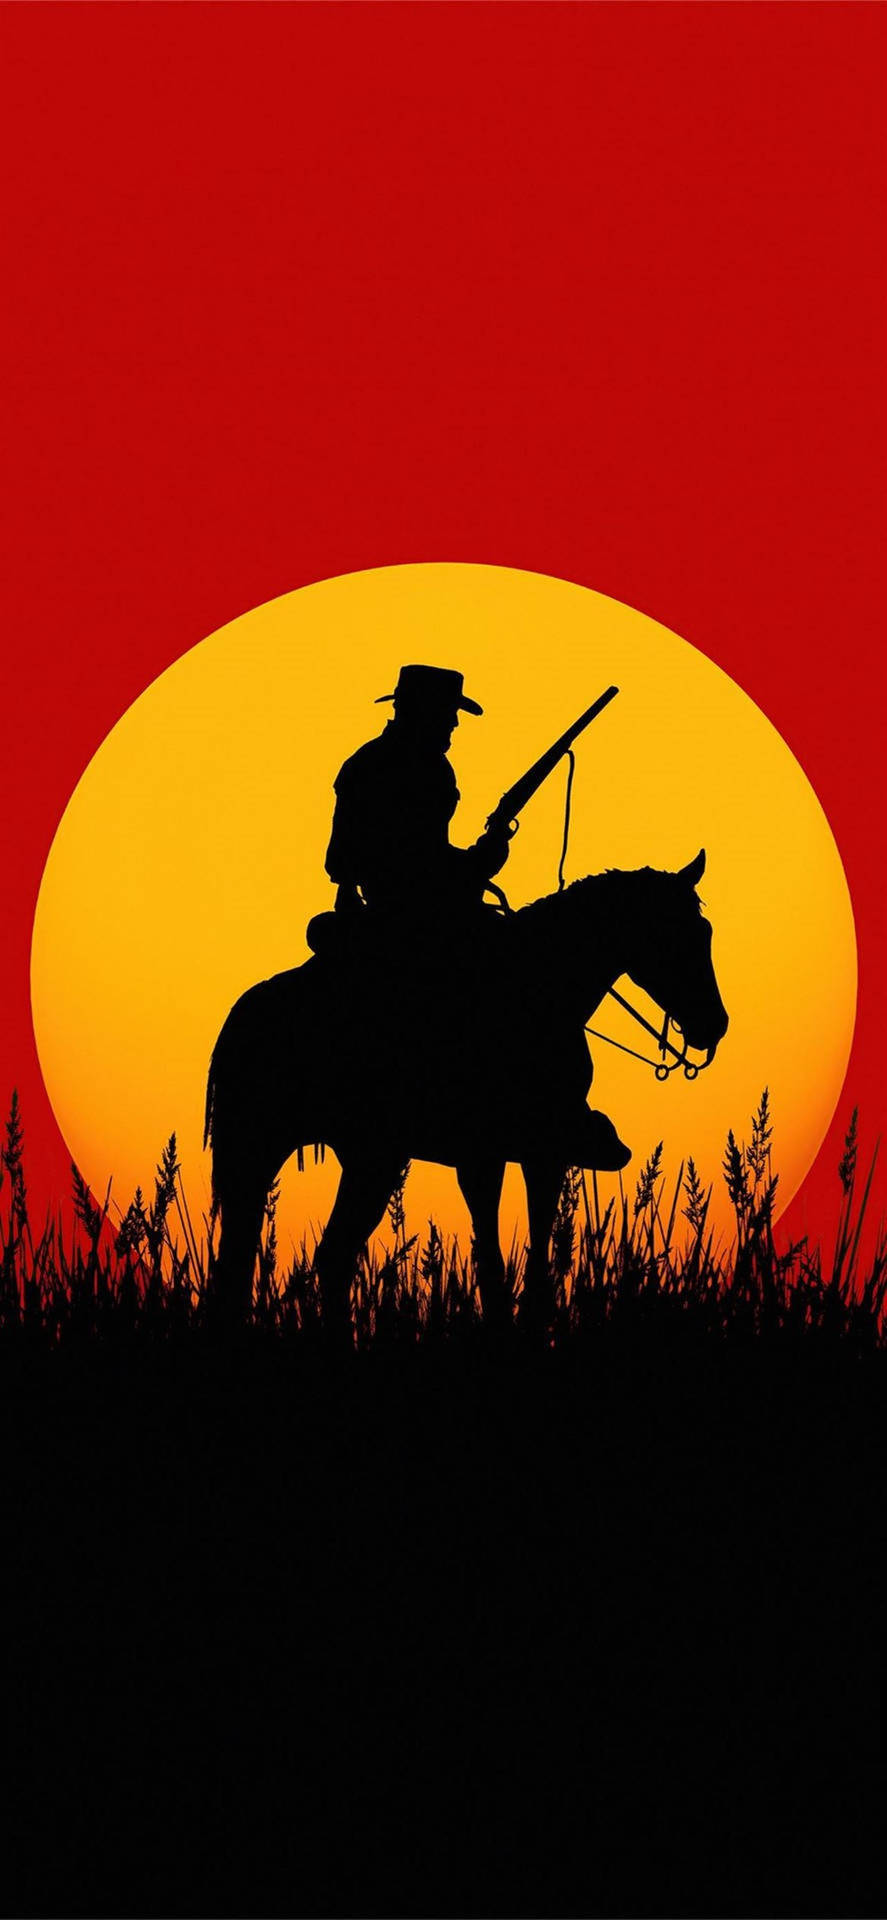 "Explore the Wild West and Take in the Endless Horizons with Horse Red Dead Redemption 2" Wallpaper